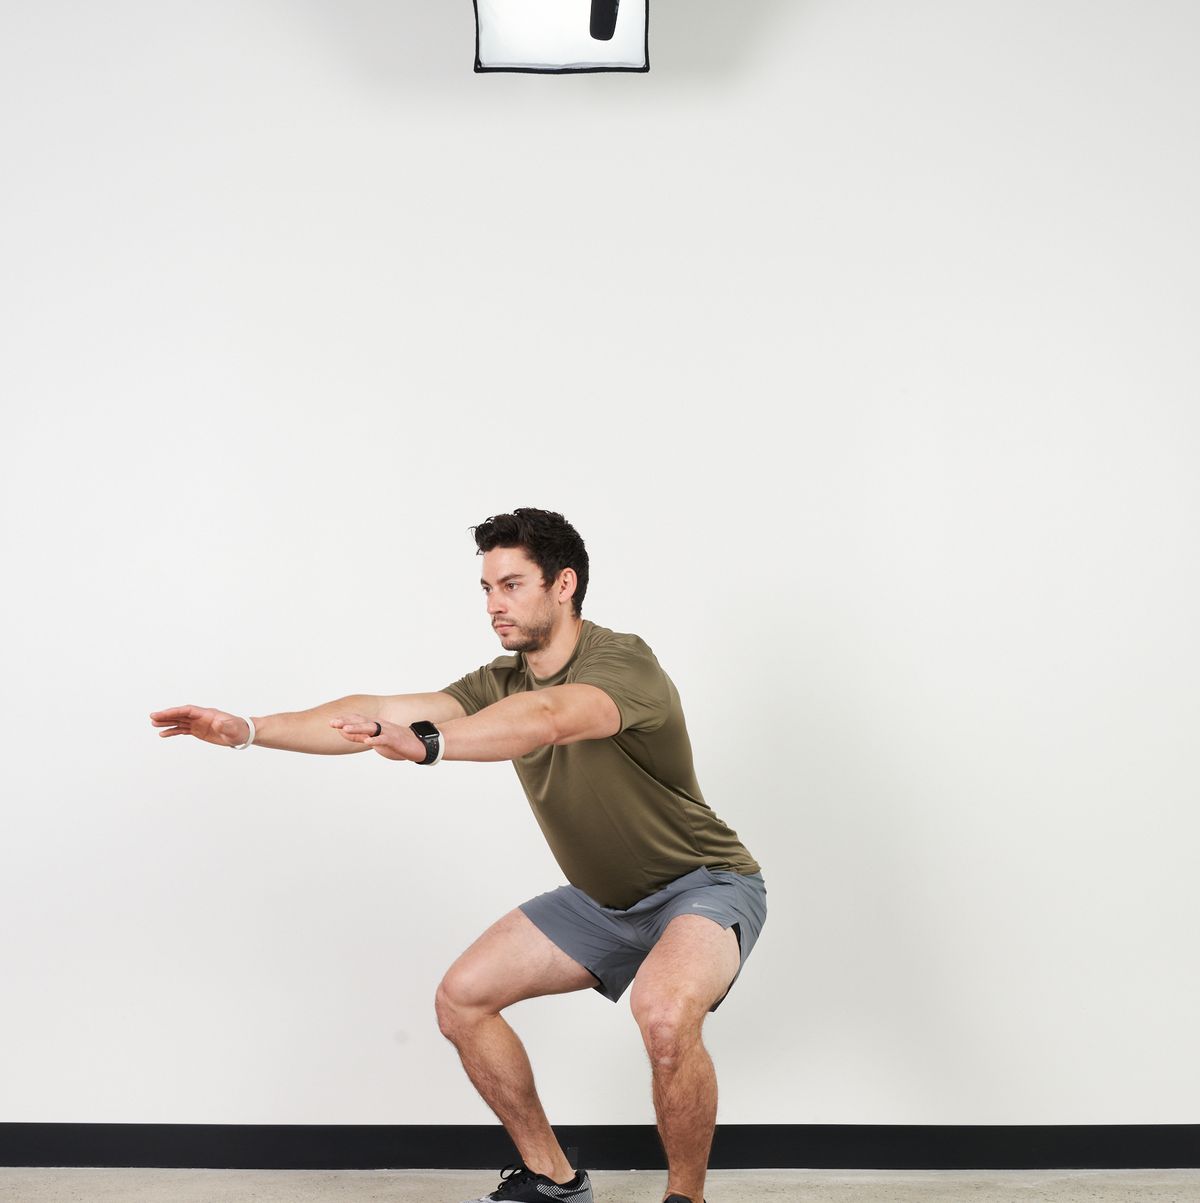 How To Do Bodyweight Squat  Muscles Worked And Benefits